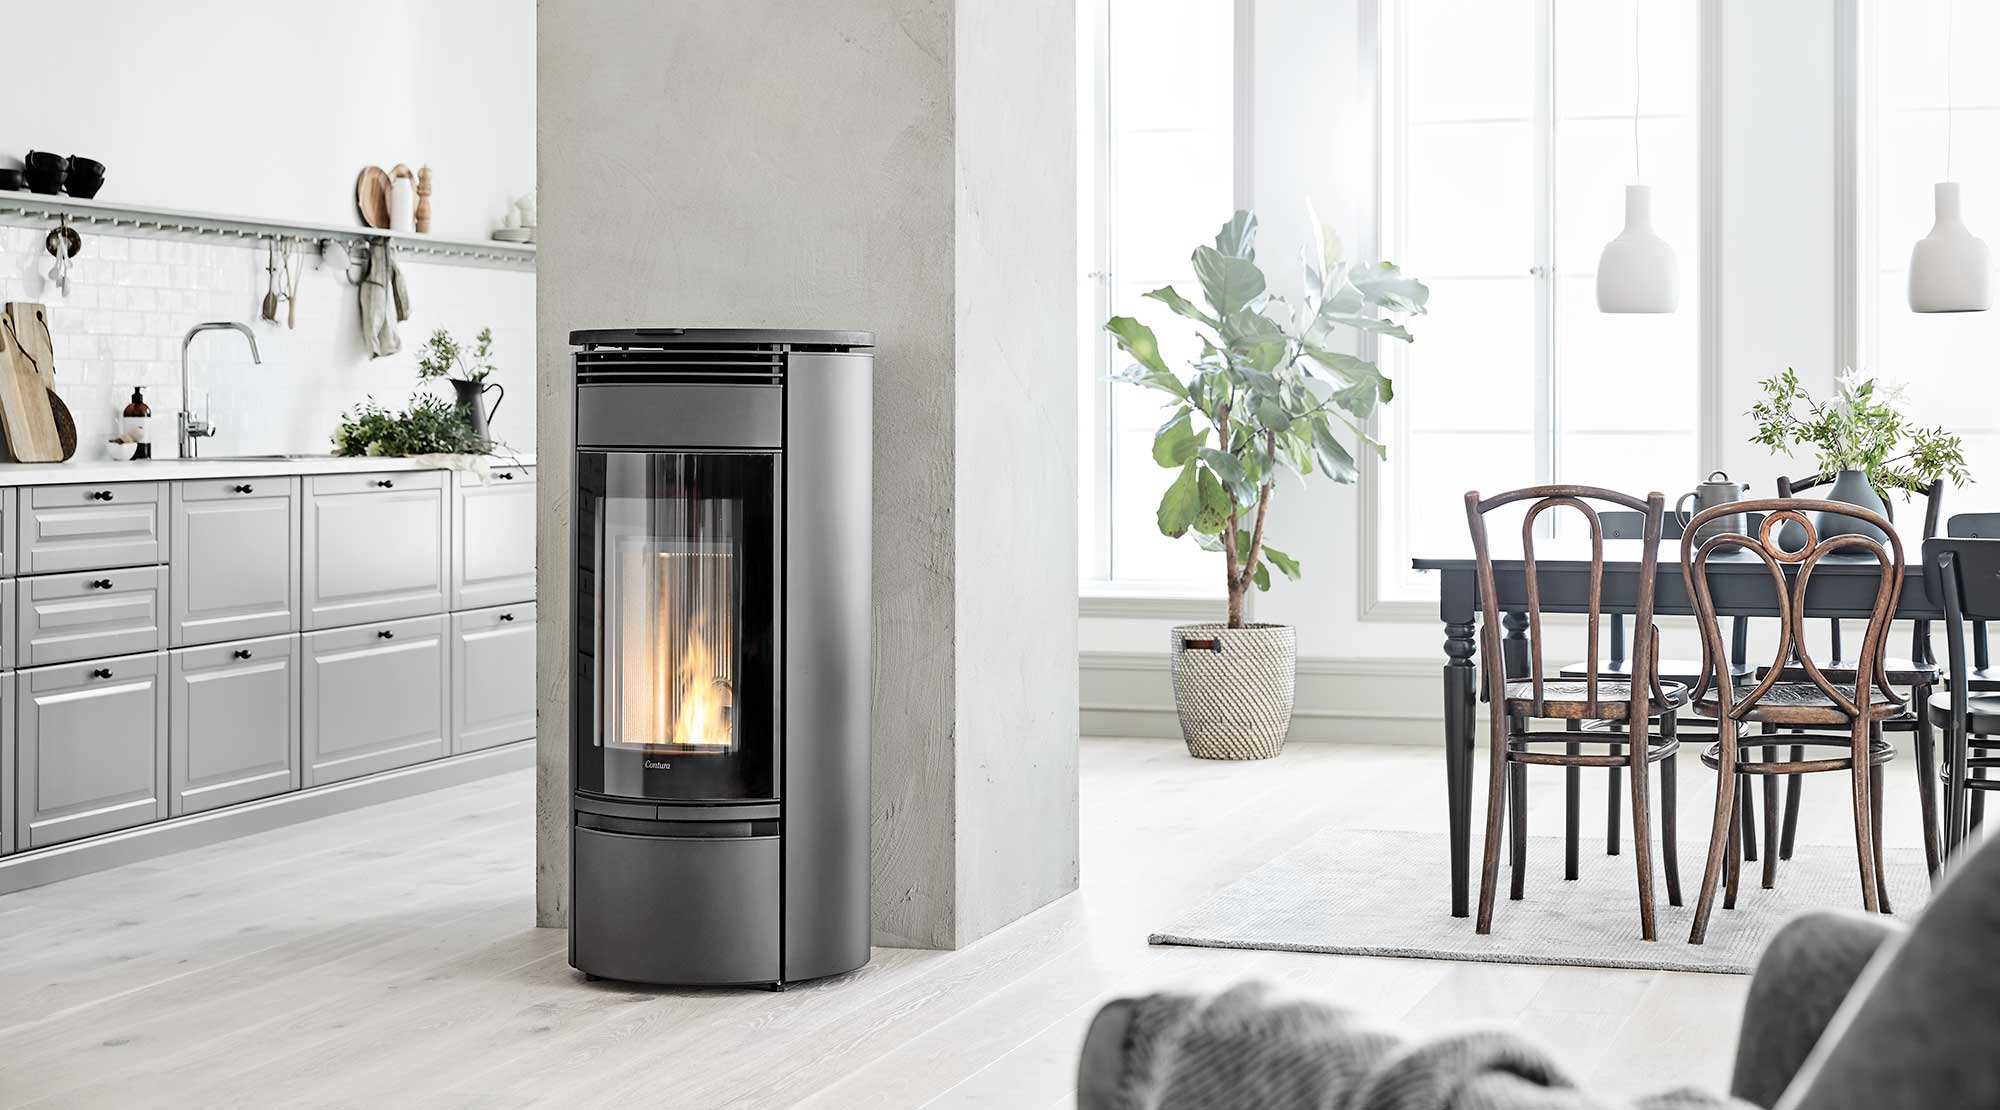 Pellet stove in home